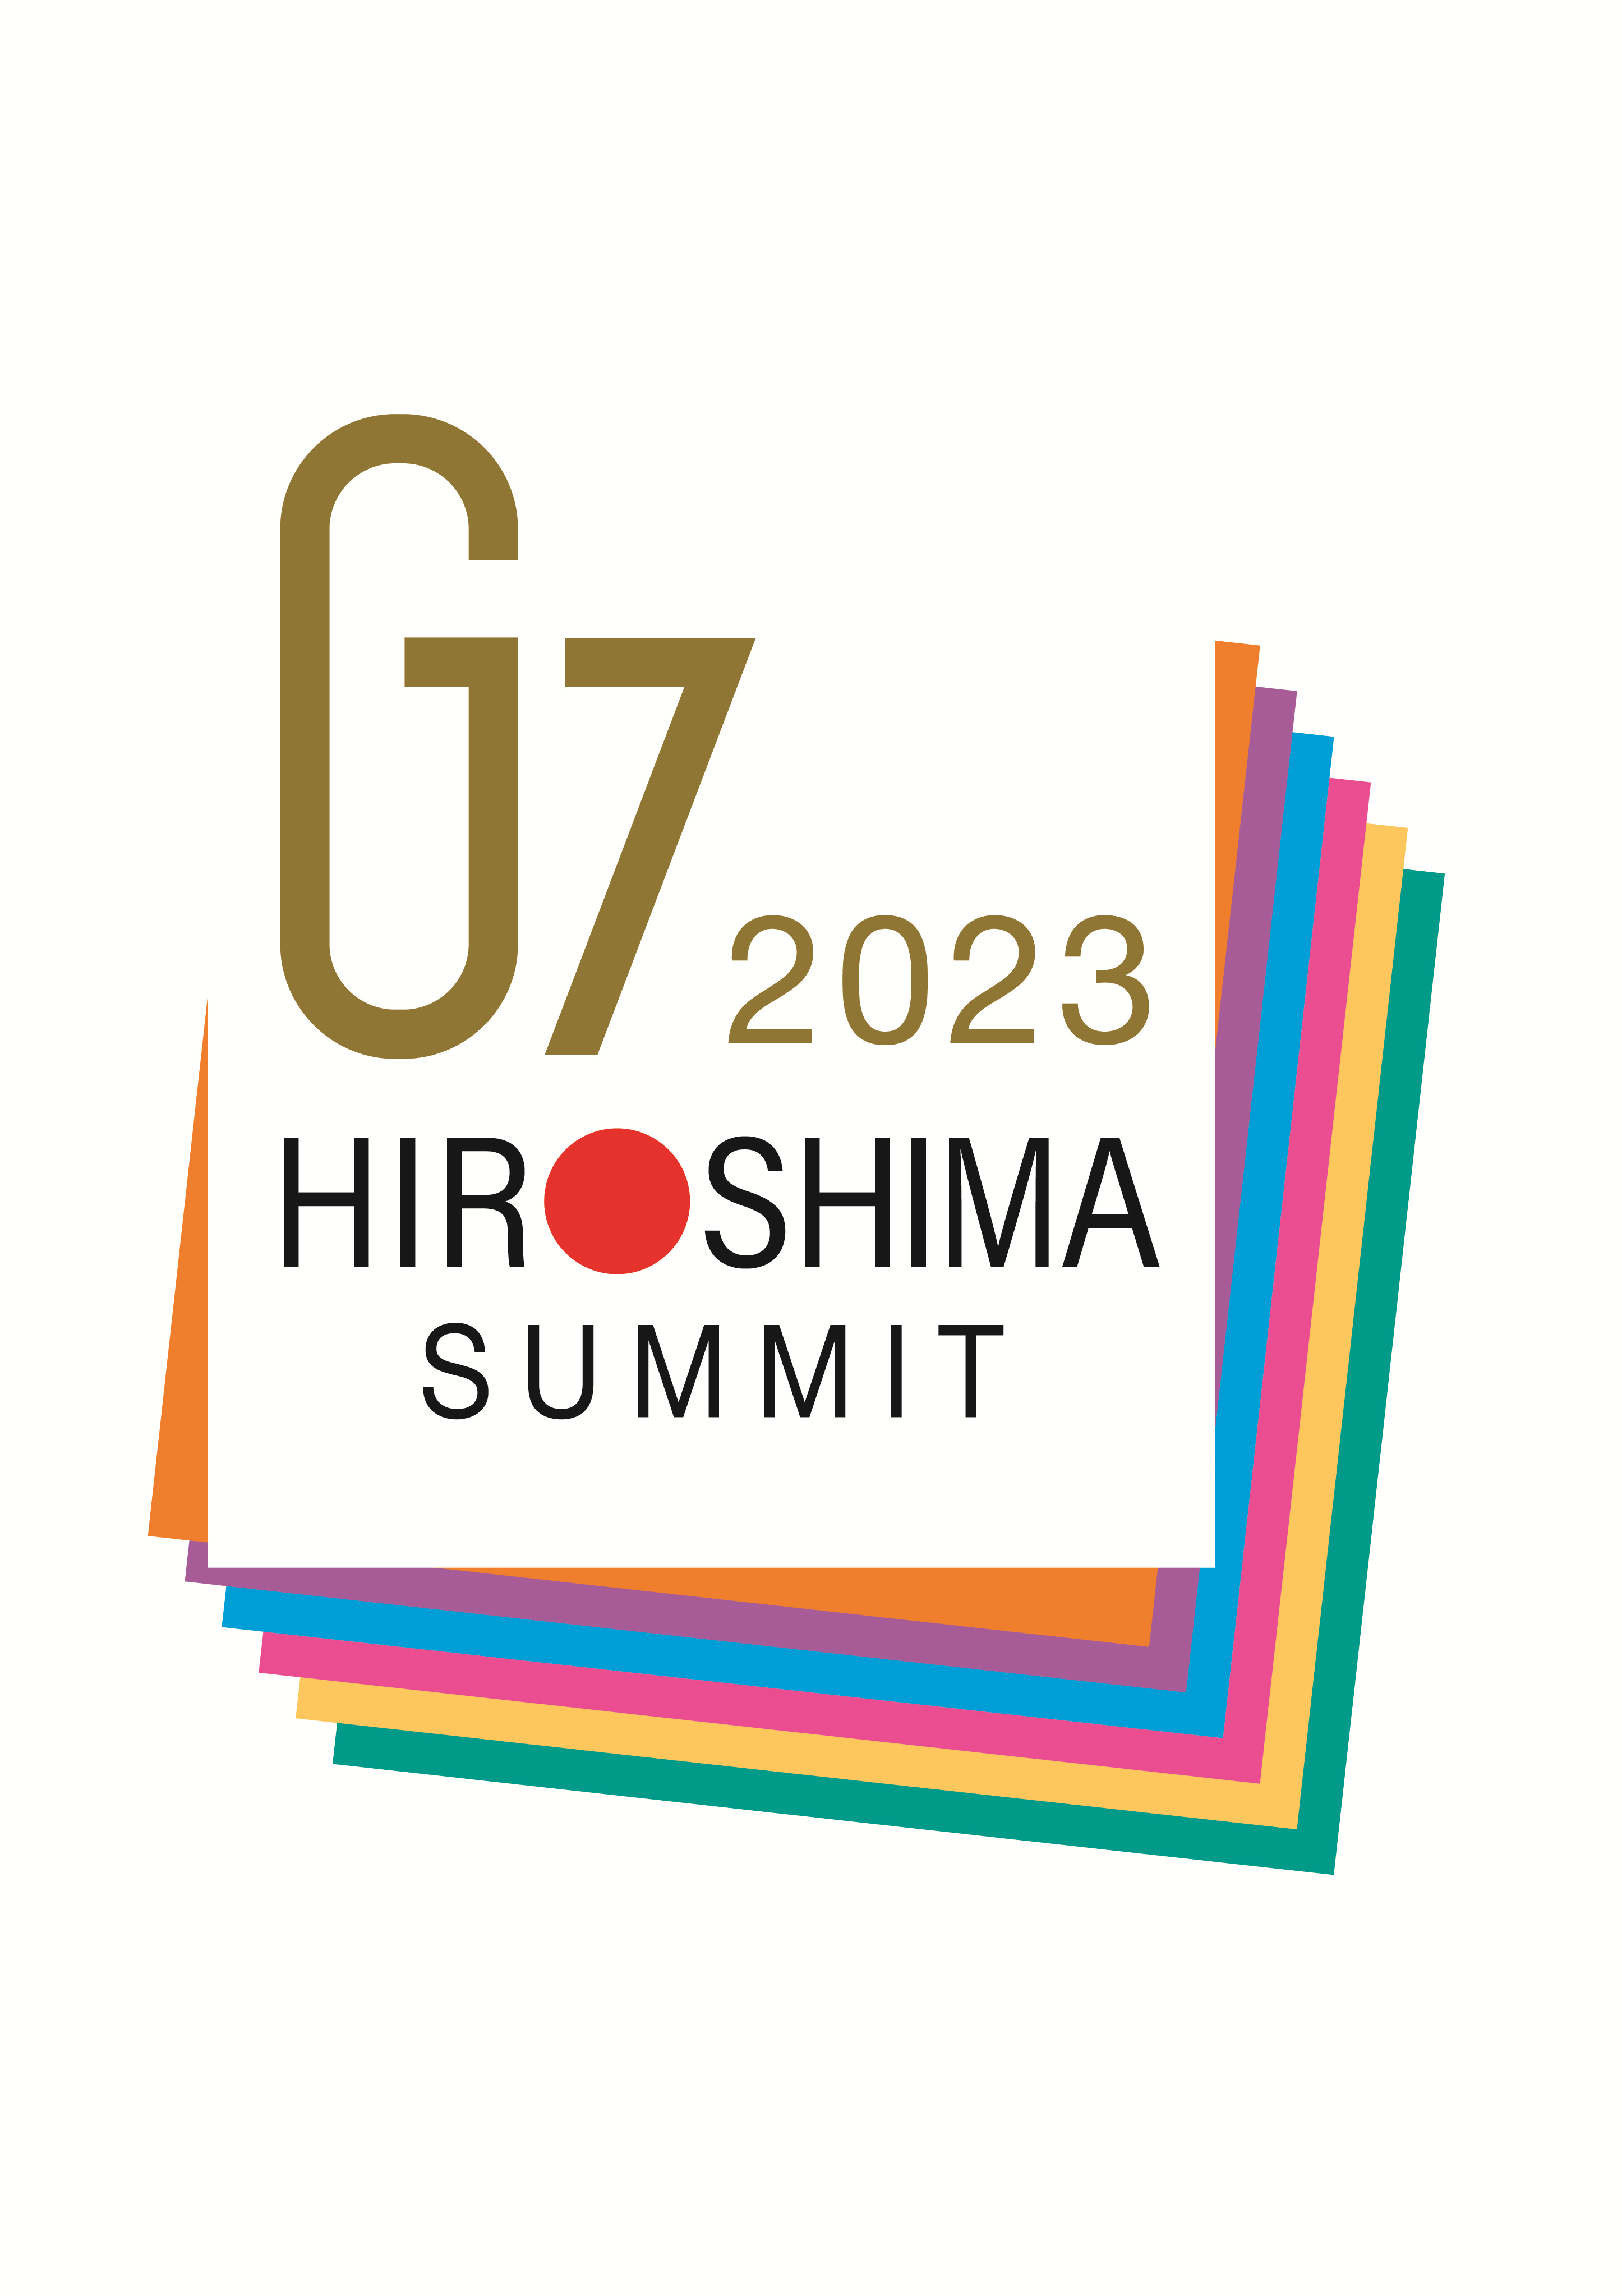 Official logo of the 2023 G7 Hiroshima Summit